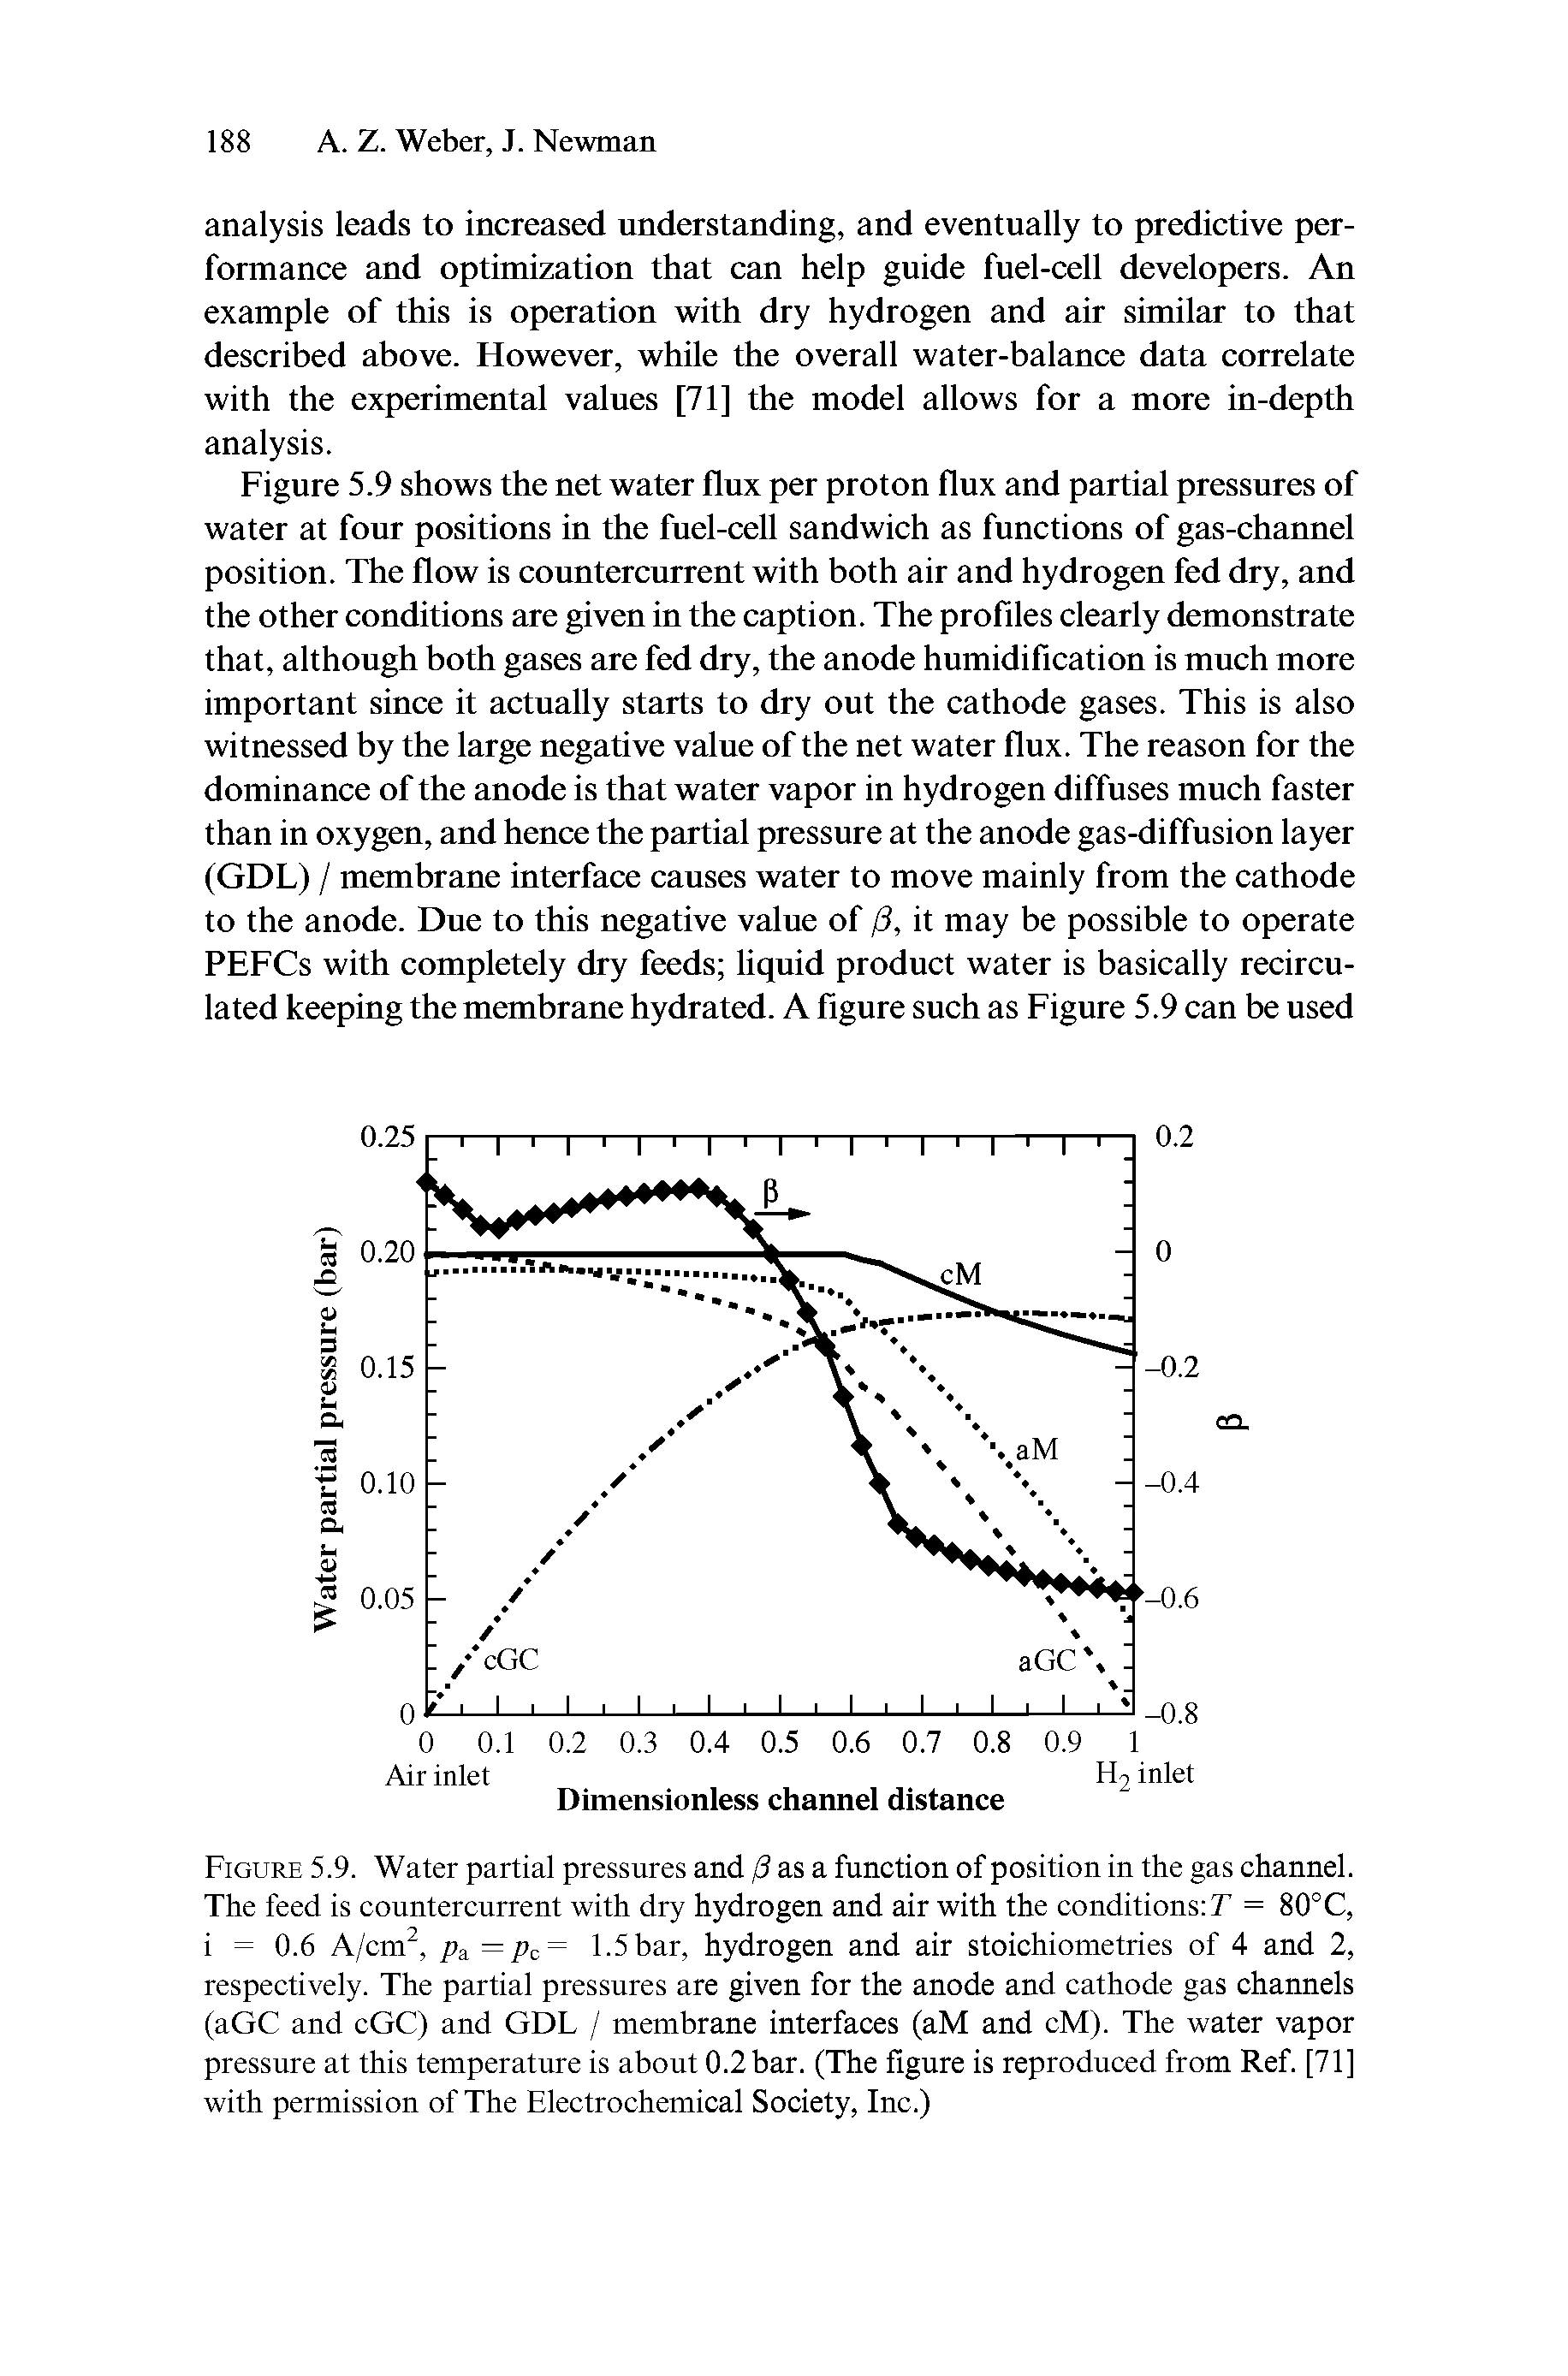 Figure 5.9. Water partial pressures and / as a function of position in the gas channel. The feed is countercurrent with dry hydrogen and air with the conditions T = 80°C, i = 0.6 A/cm, psi—pc= 1.5 bar, hydrogen and air stoichiometries of 4 and 2, respectively. The partial pressures are given for the anode and cathode gas channels (aGC and cGC) and GDL / membrane interfaces (aM and cM). The water vapor pressure at this temperature is about 0.2 bar. (The figure is reproduced from Ref. [71] with permission of The Electrochemical Society, Inc.)...